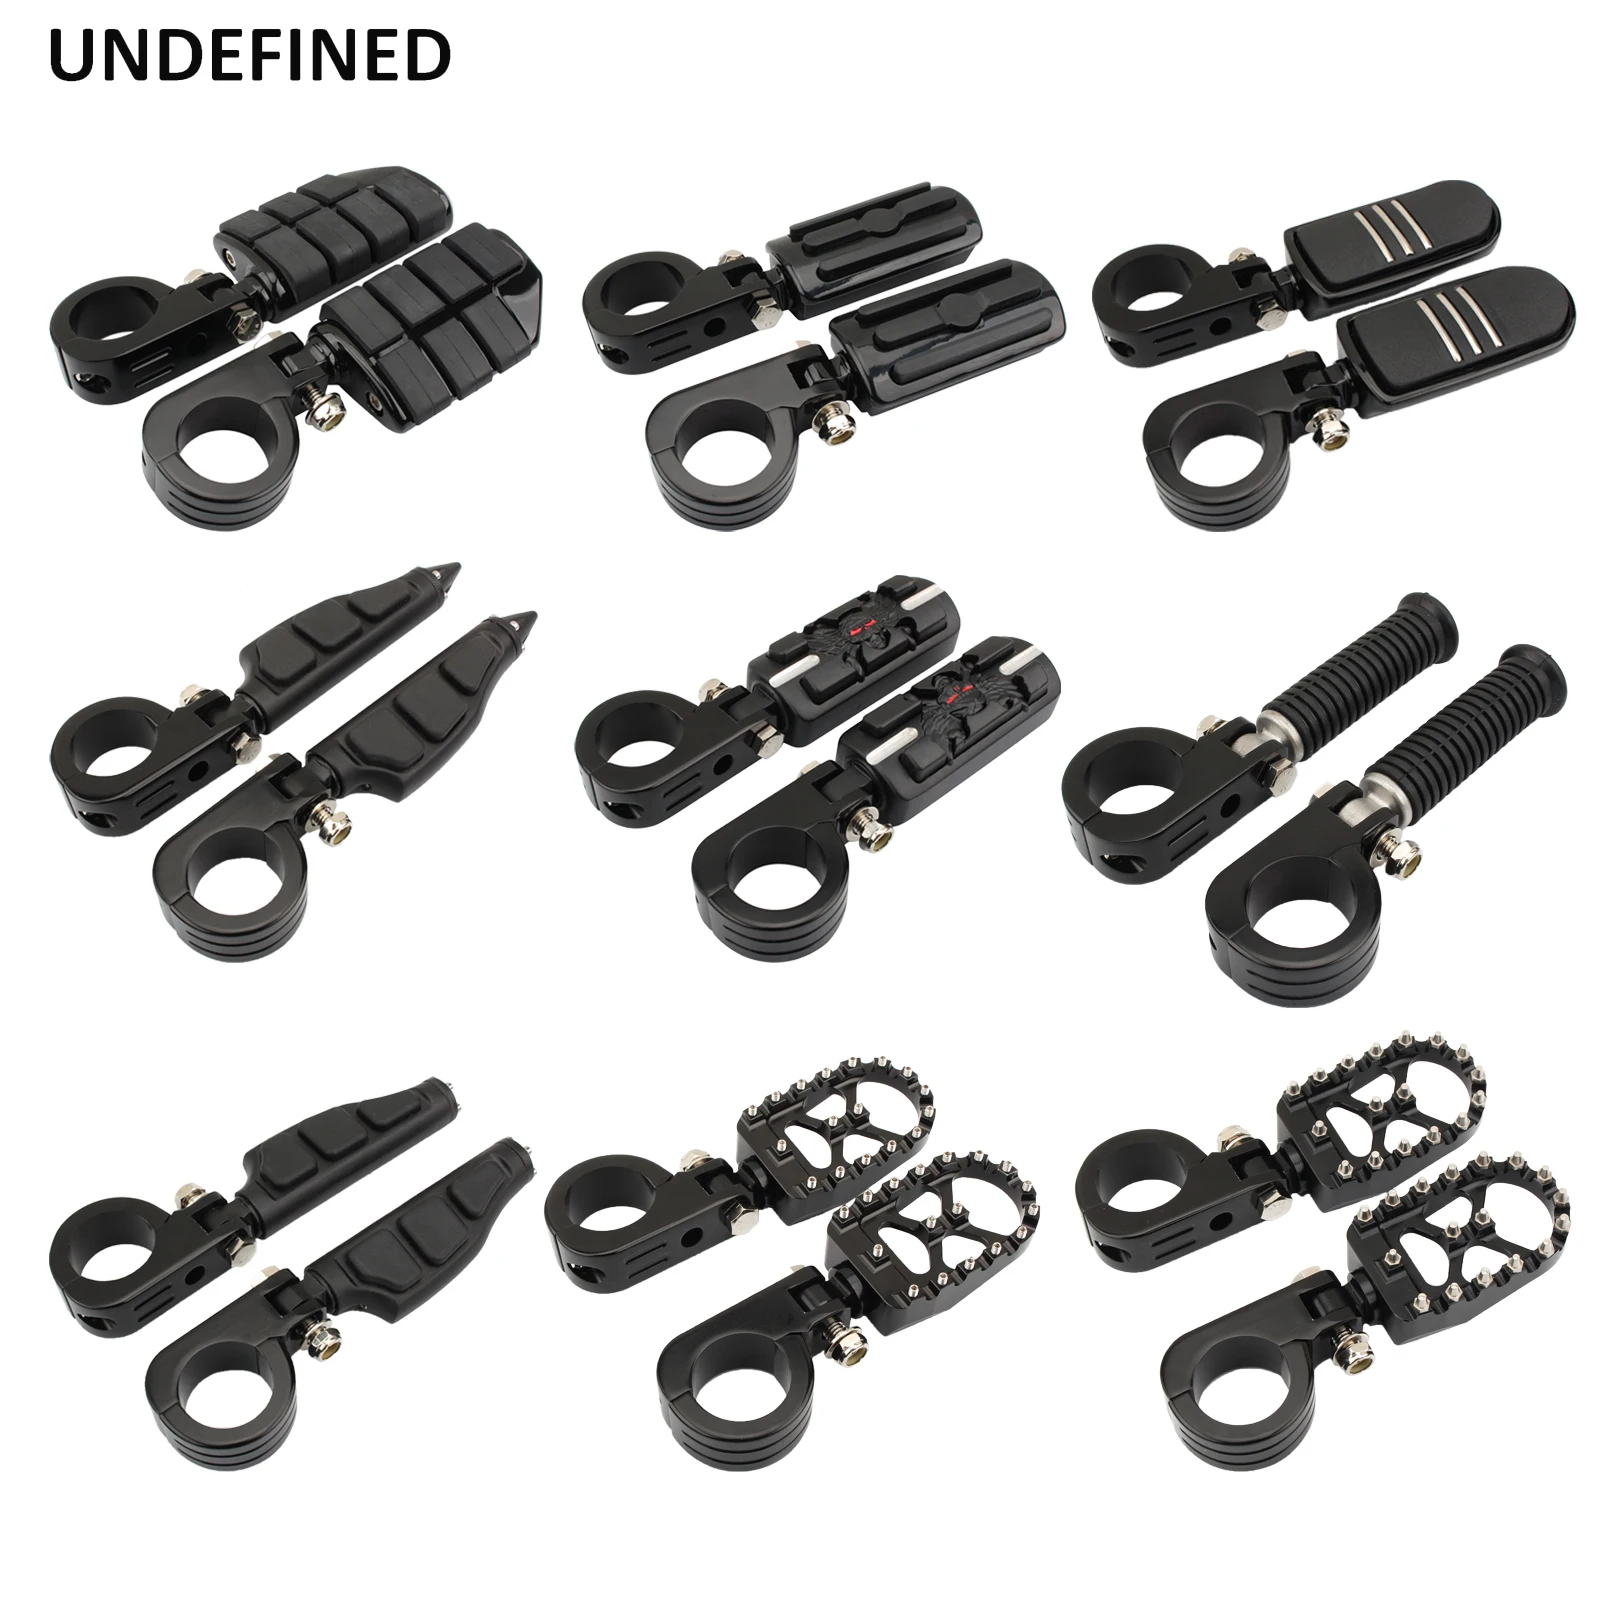 Motorcycle CNC Mount-Style Foot Pegs Rearset Highway Footrests  Wing Style Footpegs For Harley Dyna Touring Chopper Cafe Racer